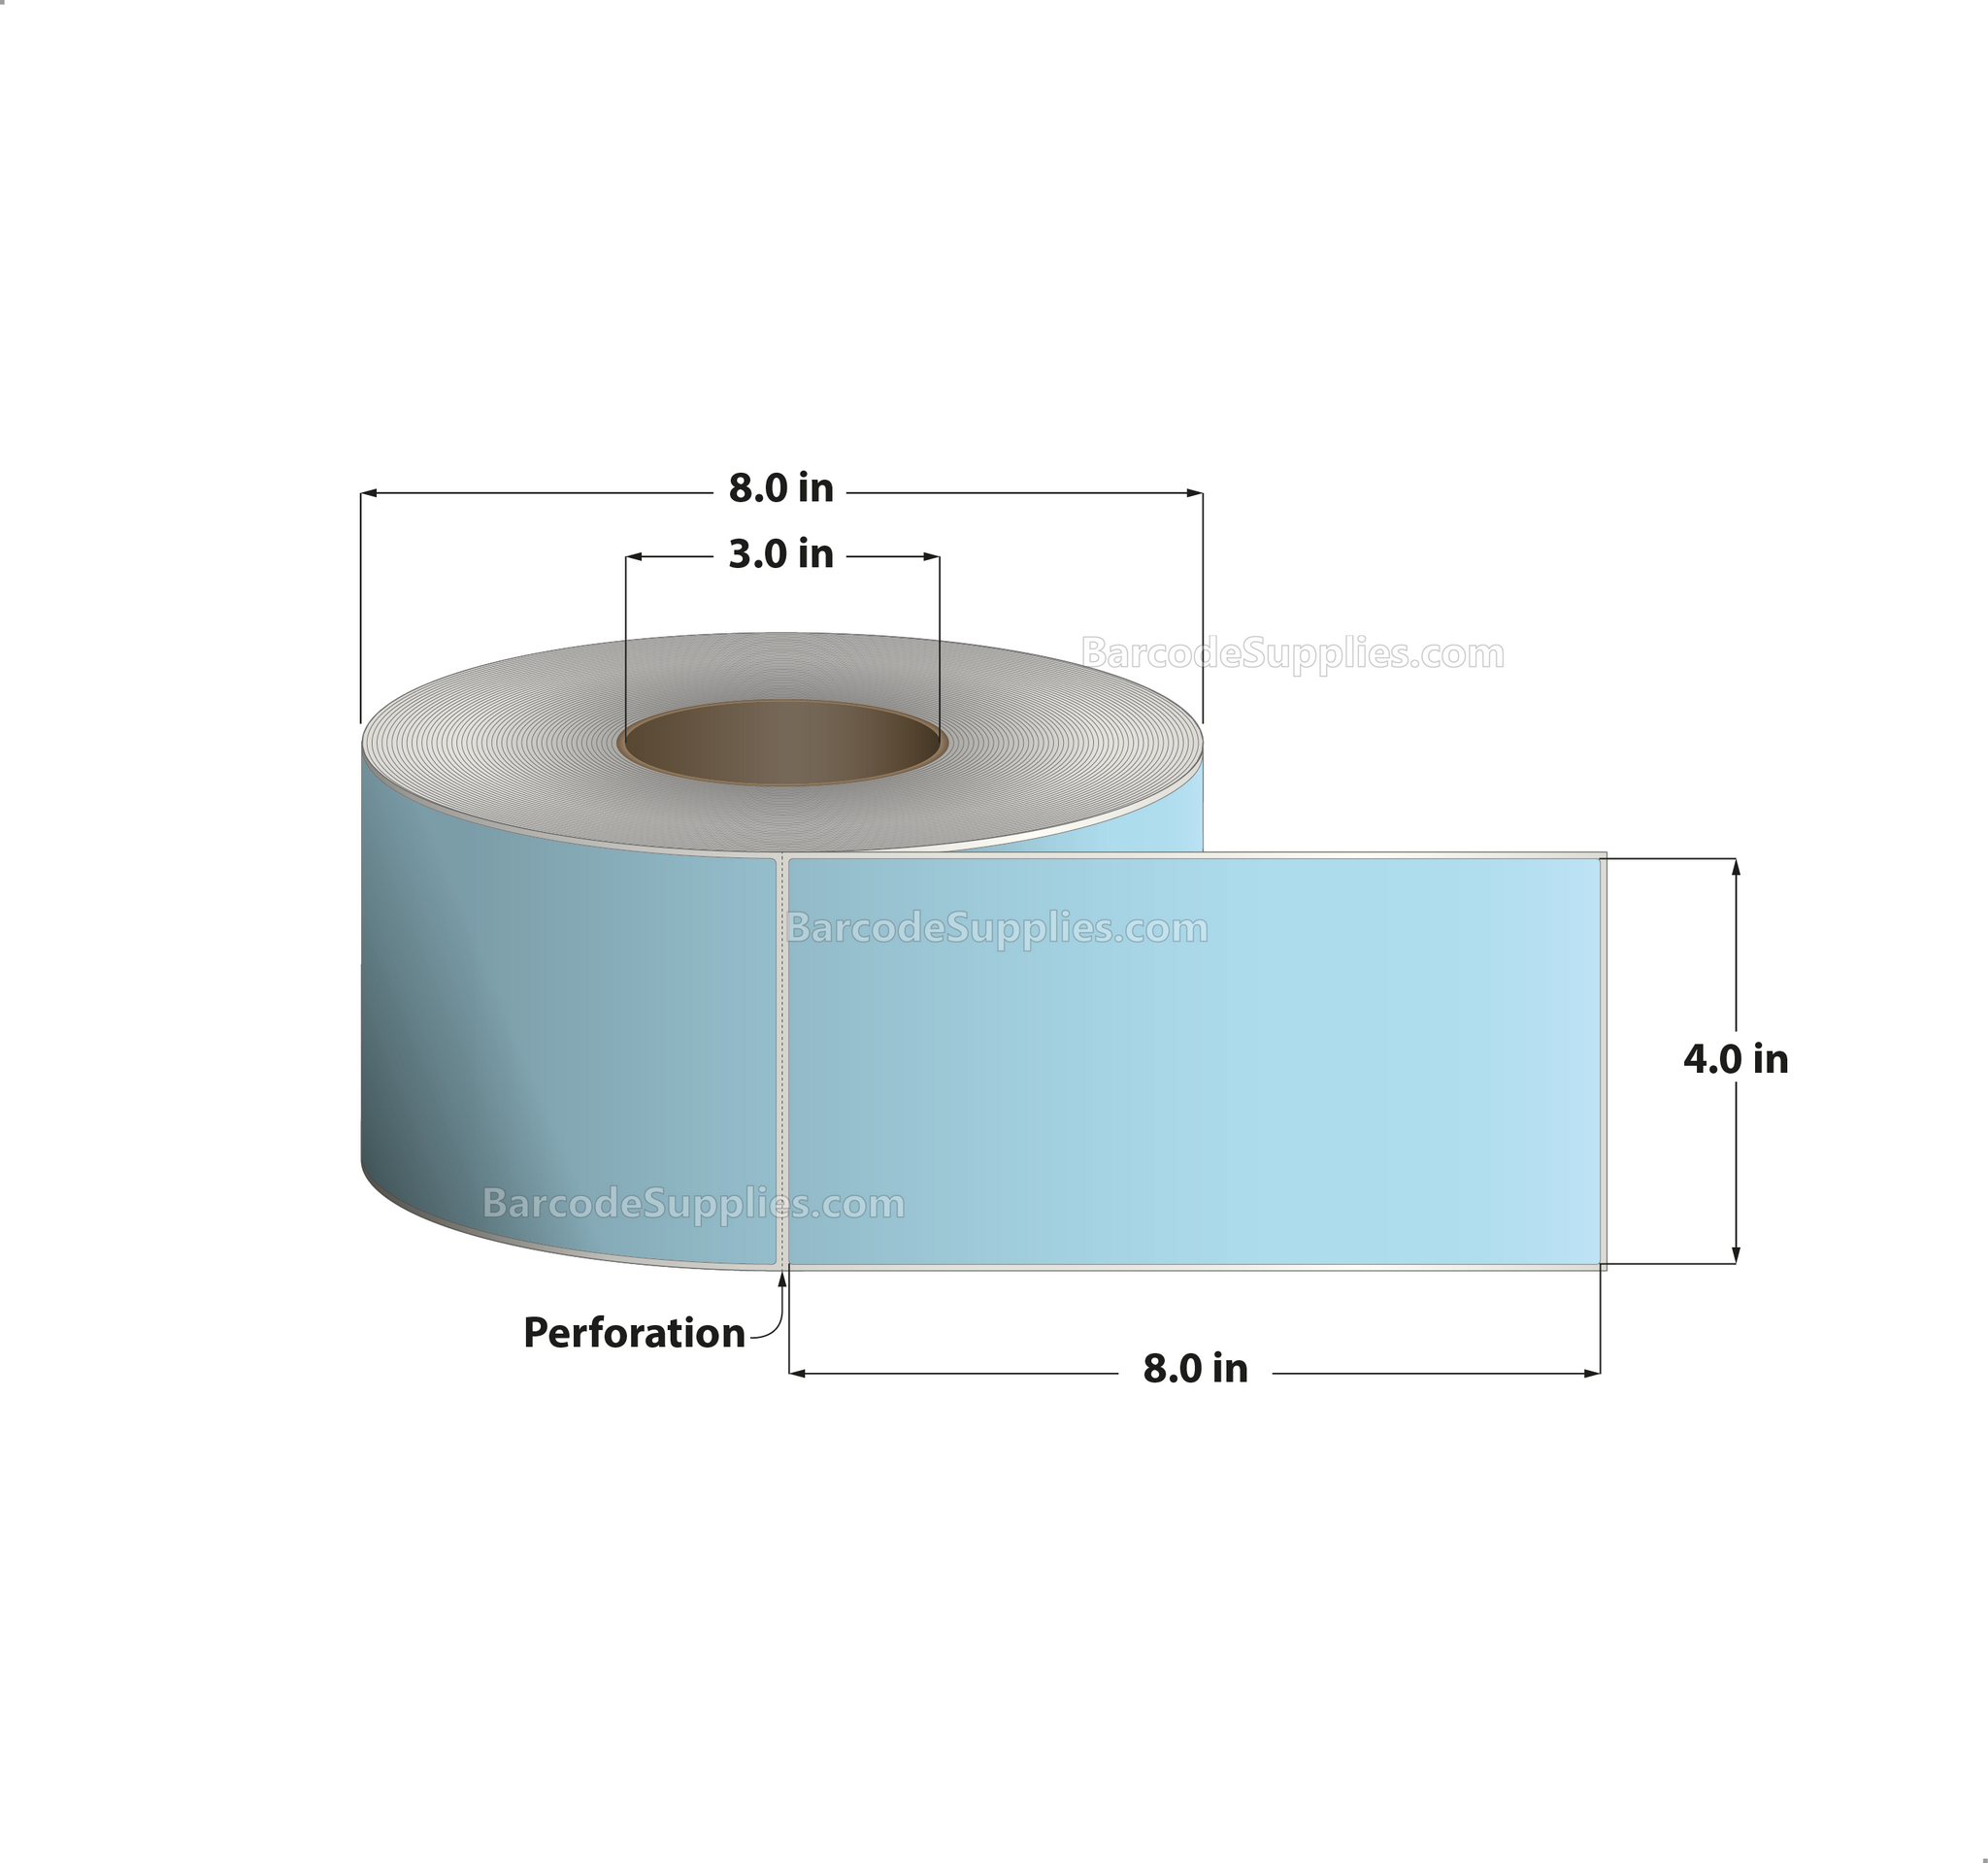 4 x 8 Thermal Transfer 290 Blue Labels With Permanent Adhesive - Perforated - 750 Labels Per Roll - Carton Of 4 Rolls - 3000 Labels Total - MPN: RFC-4-8-750-BL